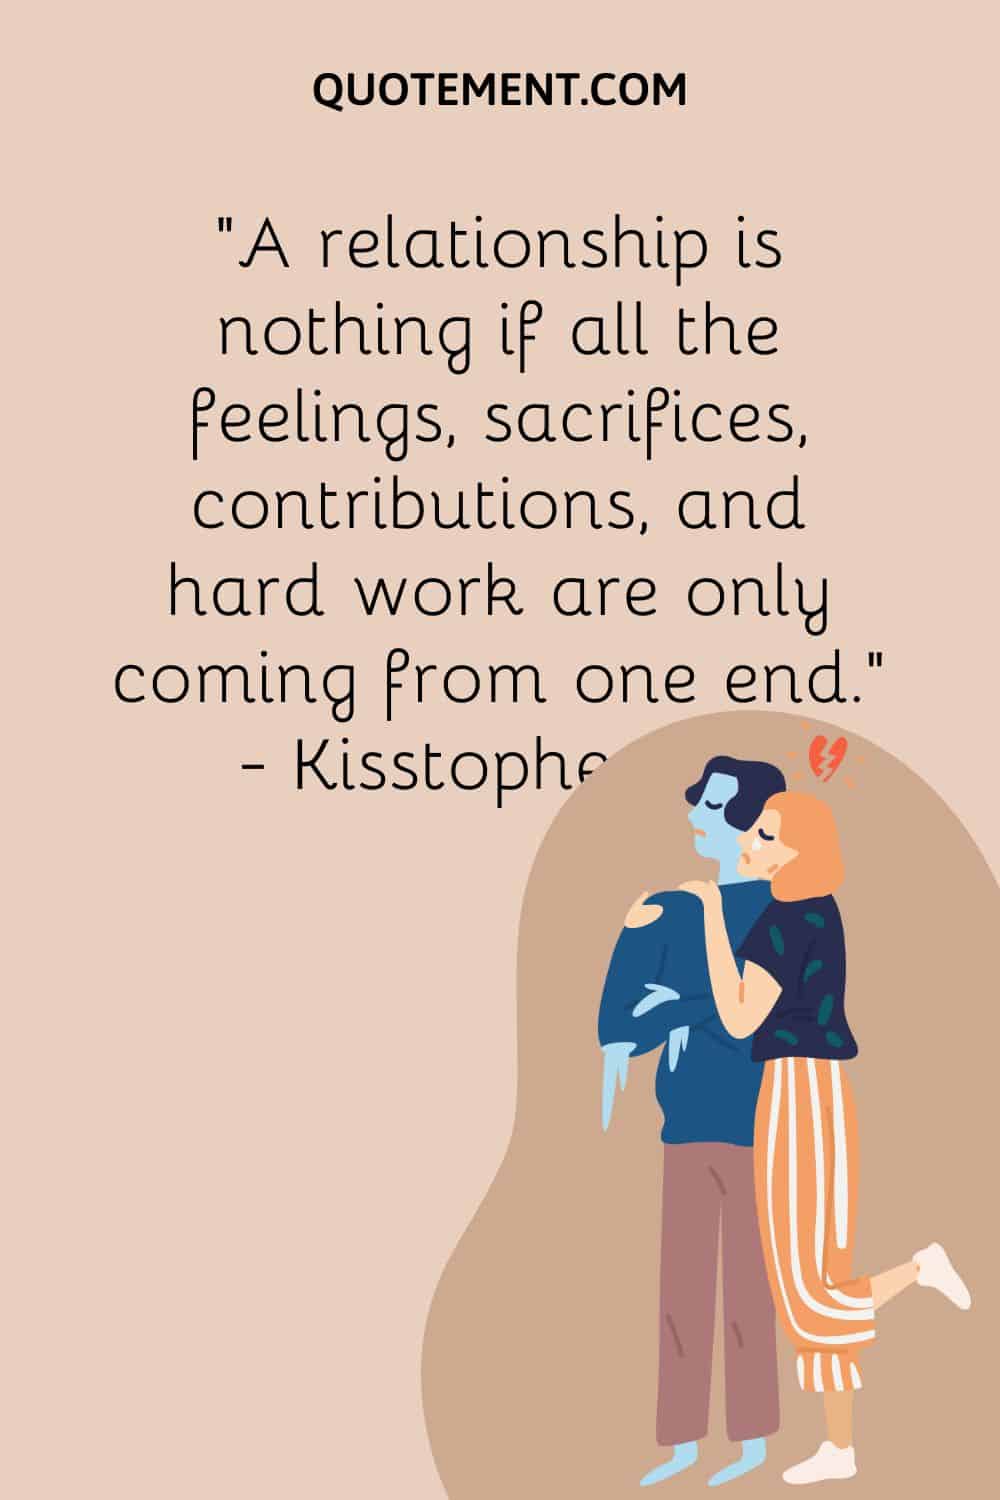 A relationship is nothing if all the feelings, sacrifices, contributions, and hard work are only coming from one end